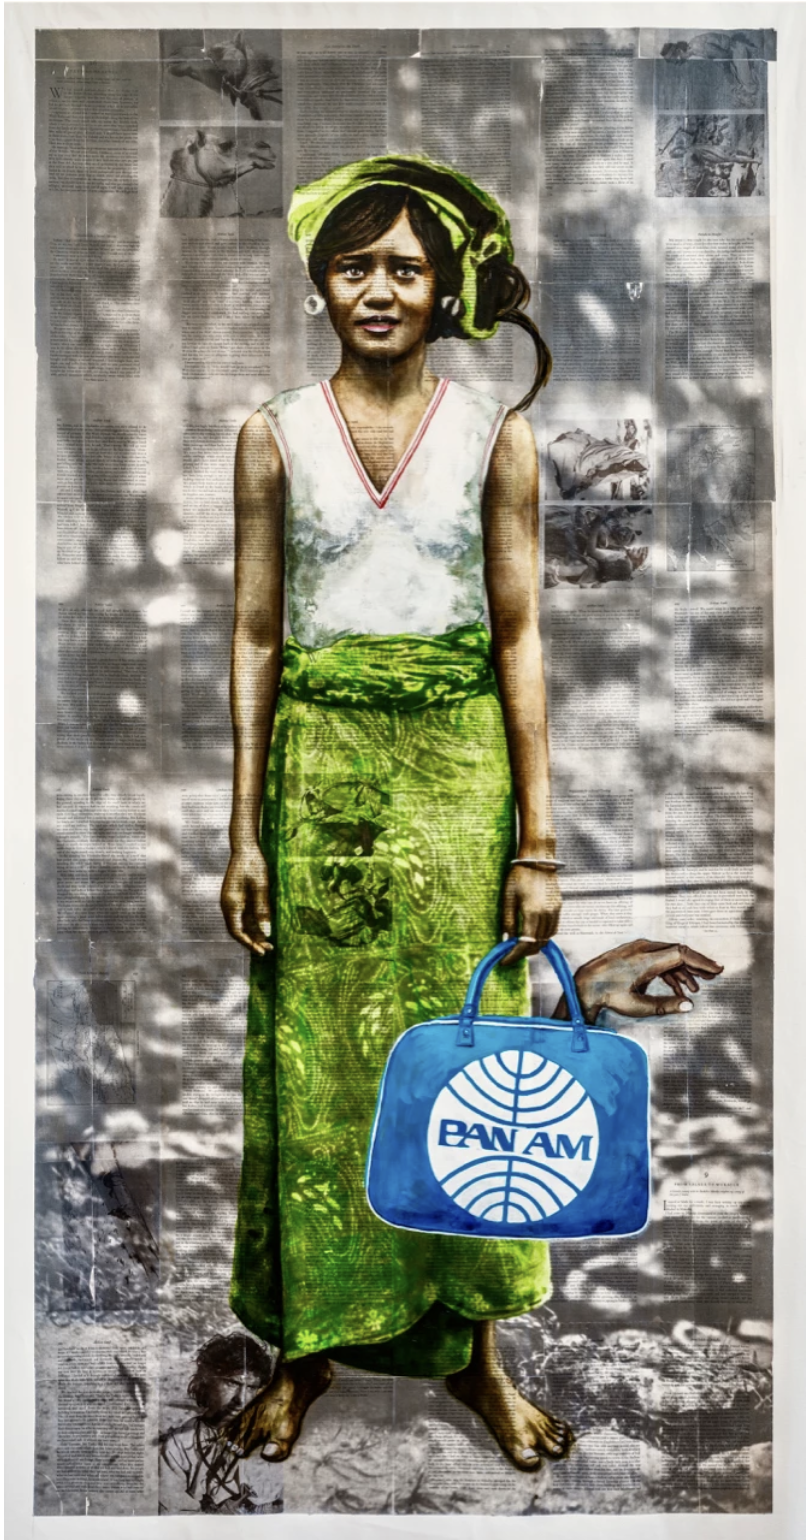 A painting from Rajkamal Kahlon's "We've Come a Long Way to Be Together" depicting a woman in a white and green dress holding a blue luggage bag